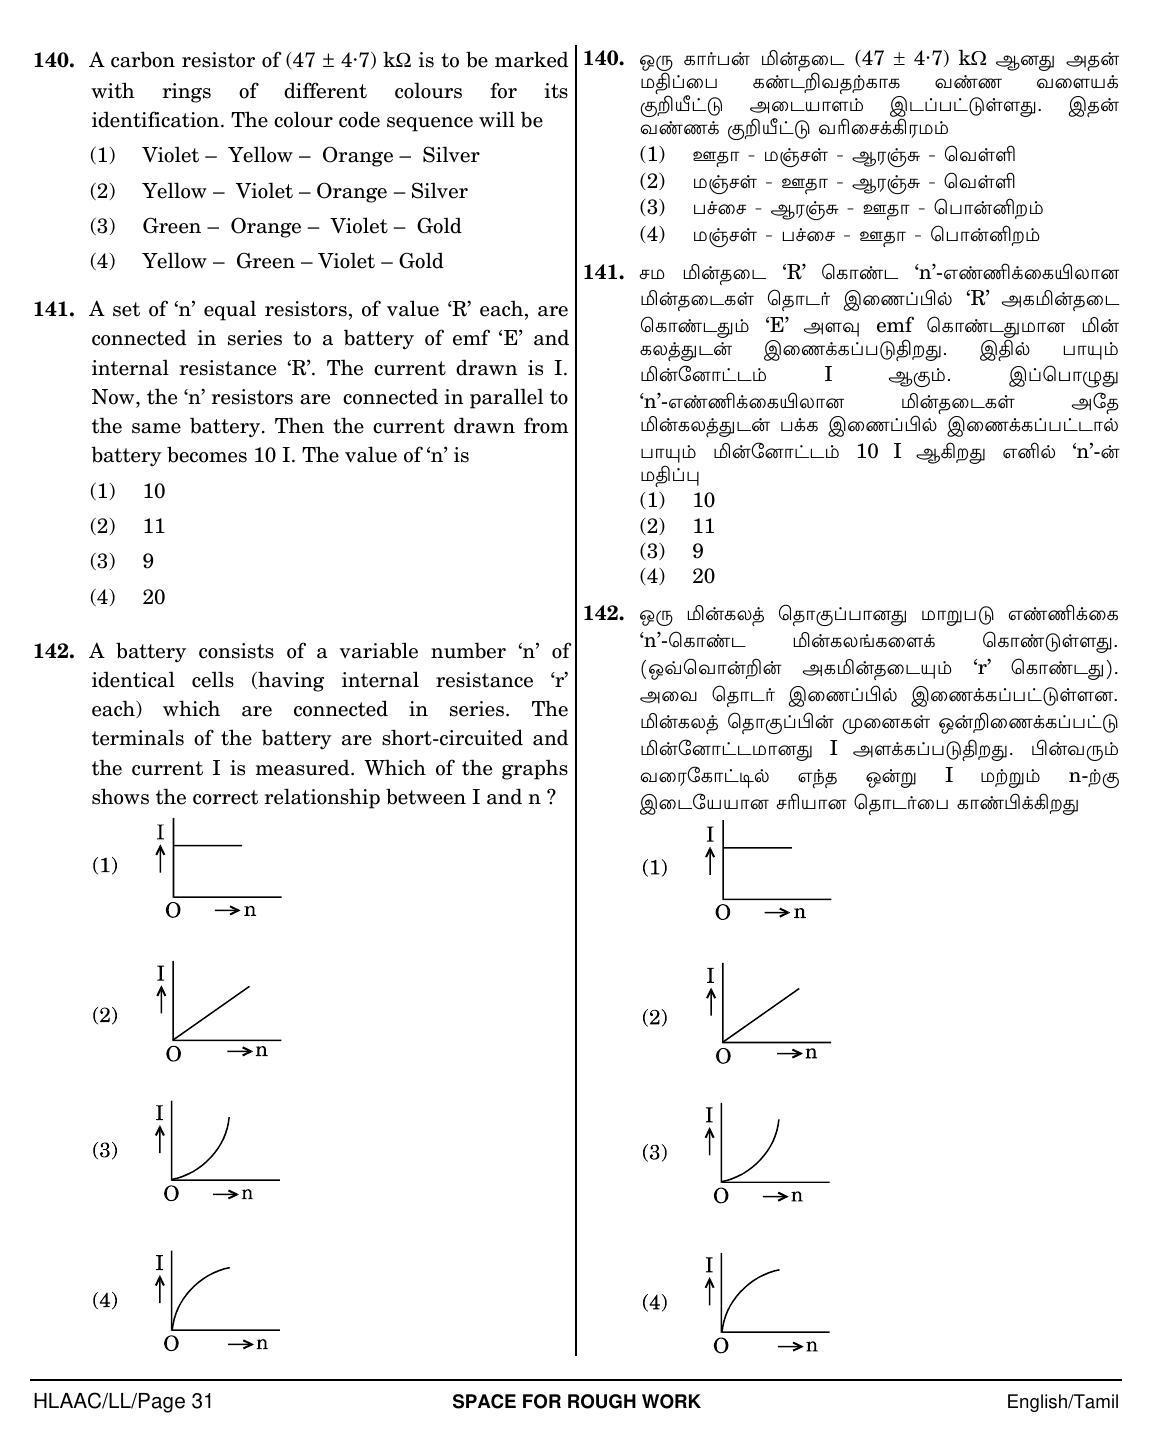 NEET Tamil LL 2018 Question Paper - Page 31